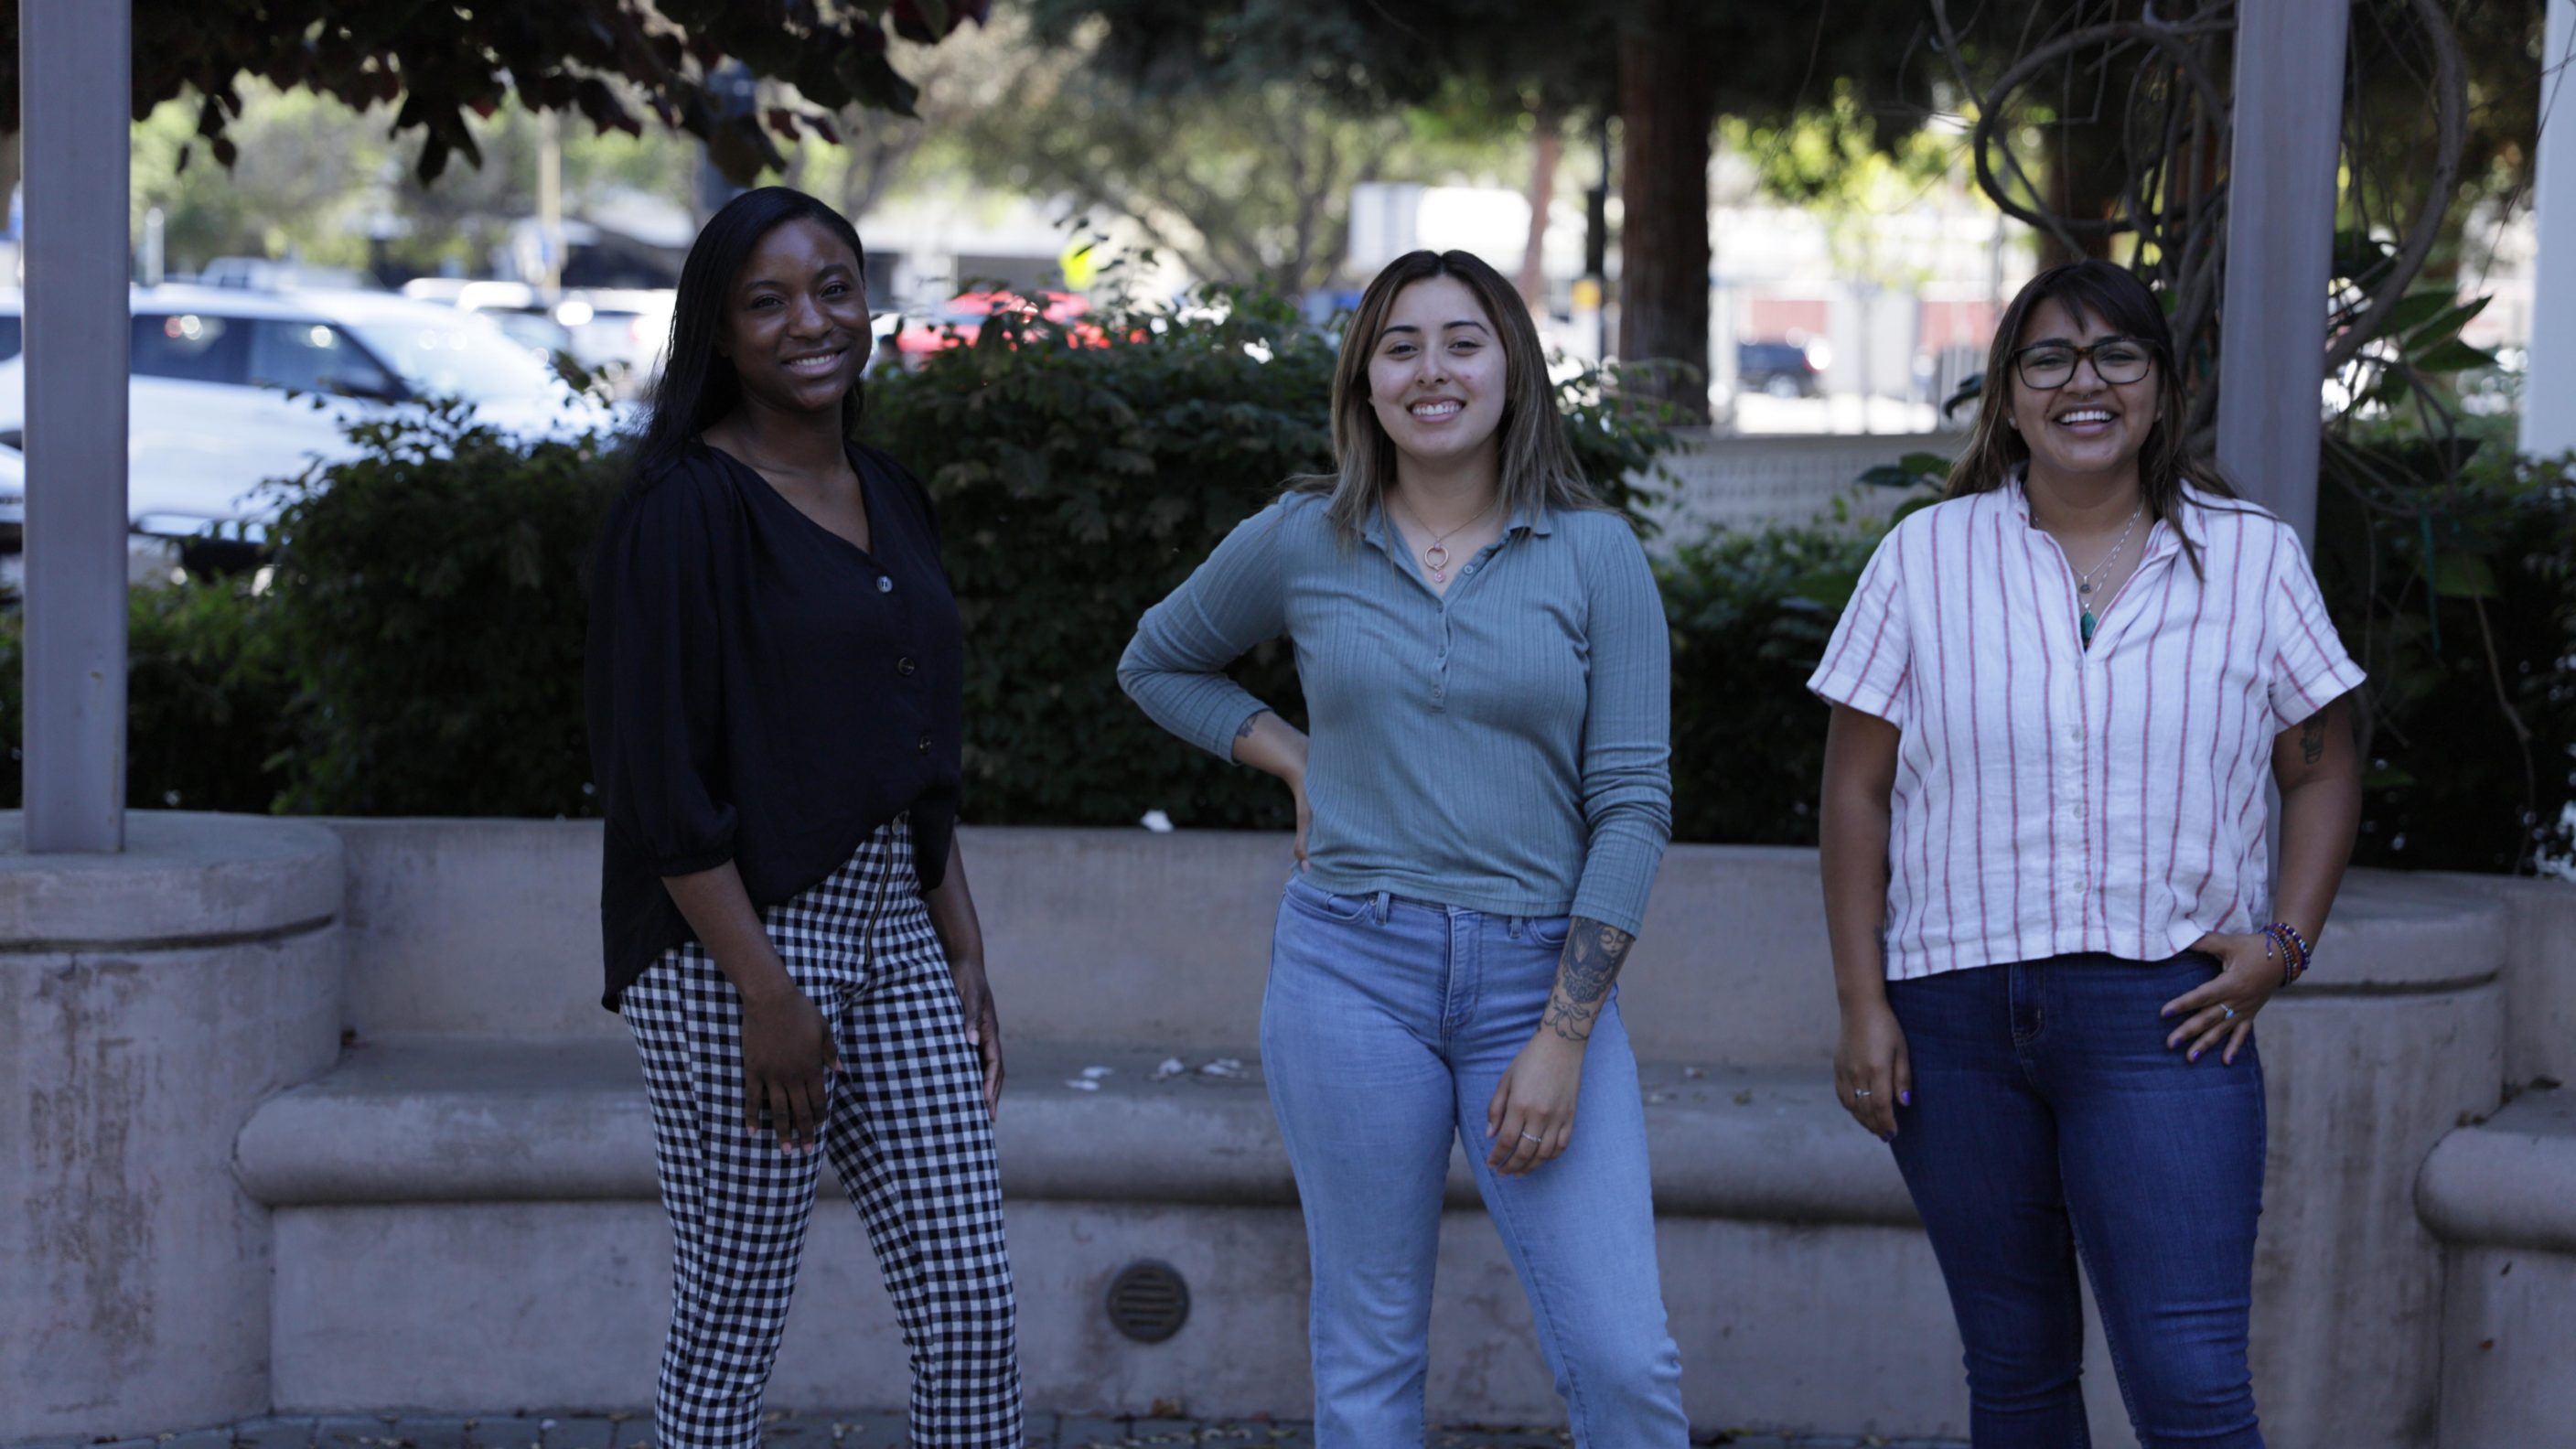 Basic Income Pilot program recipients (left to right) Aleta Smith, Naihla De Jesus, and Veronica Vieyra at the Government Center in July 2021